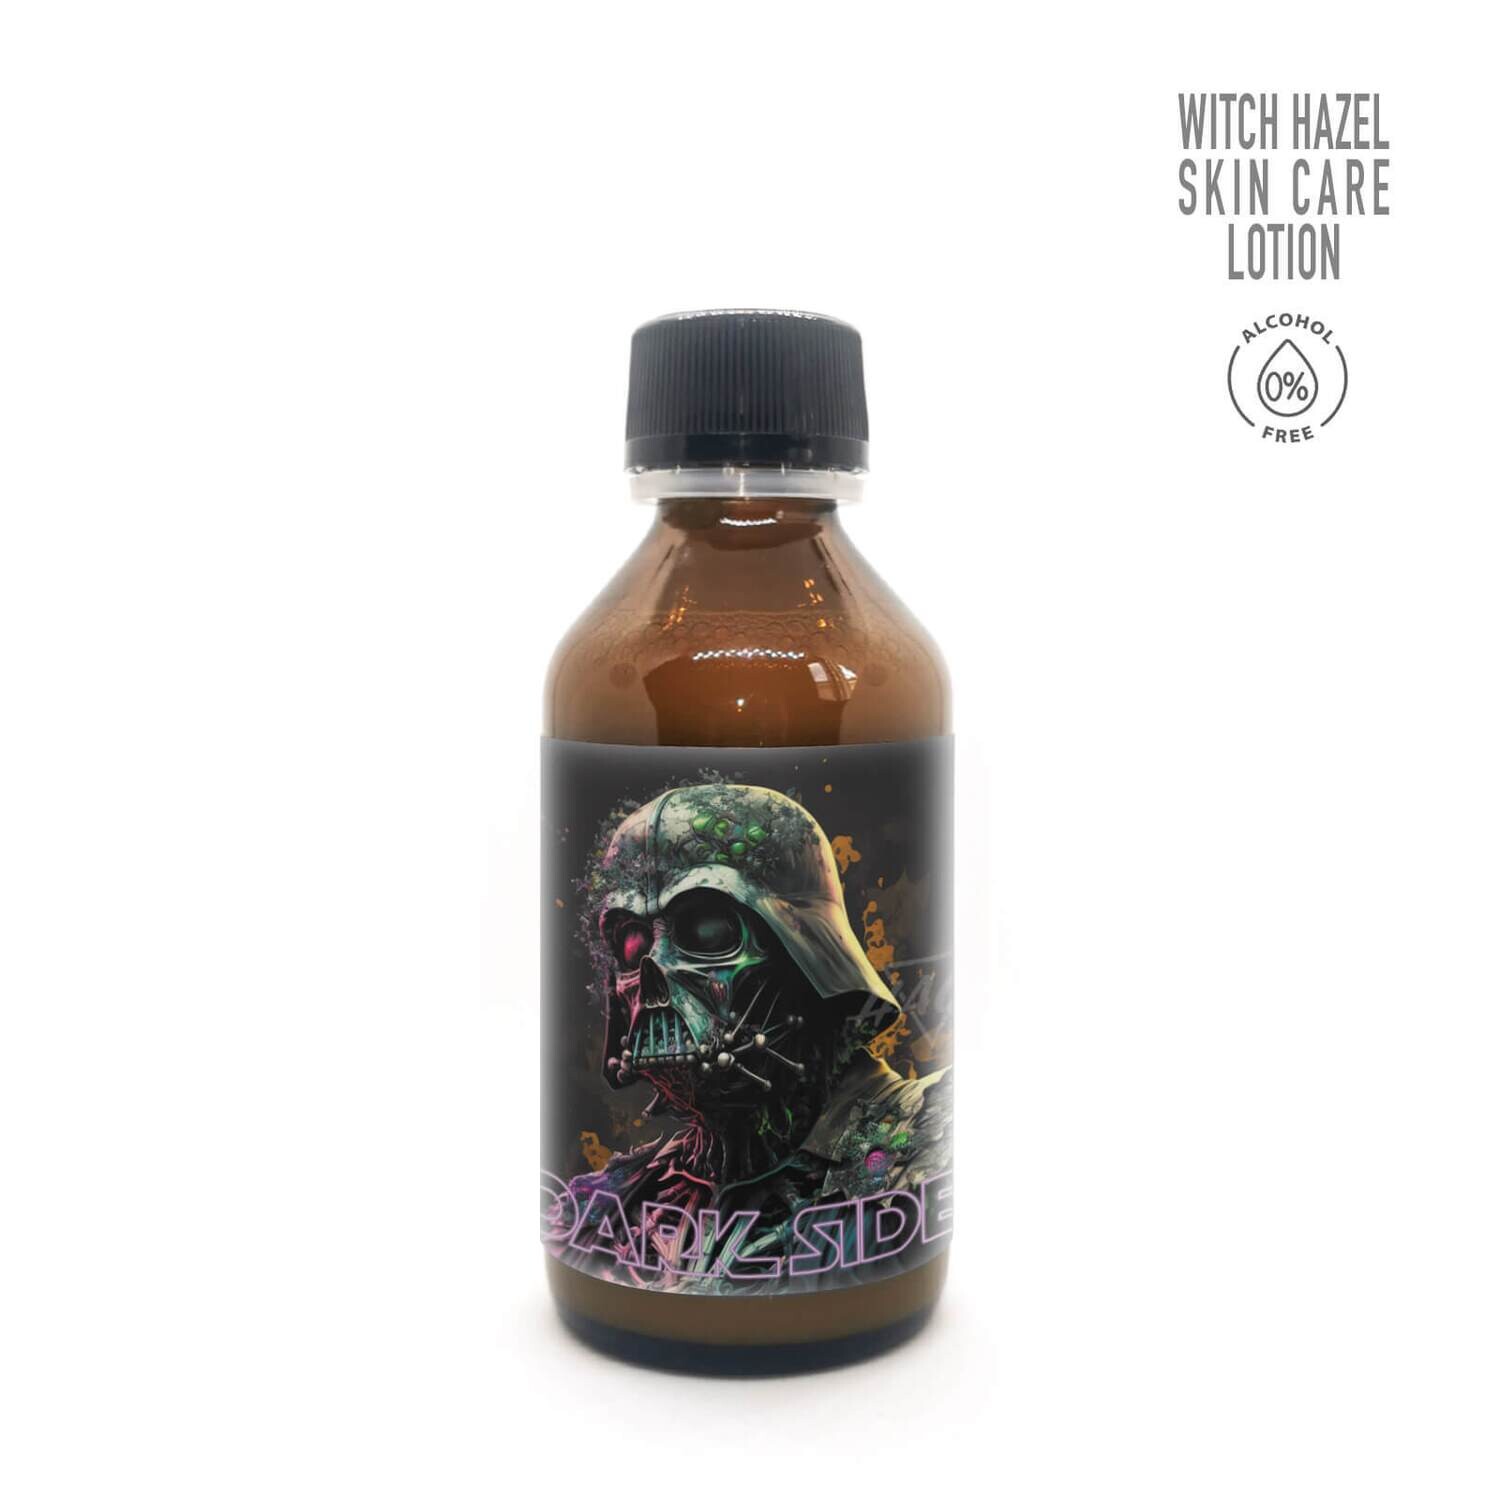 HAGS Dark Side After Shave Lotion